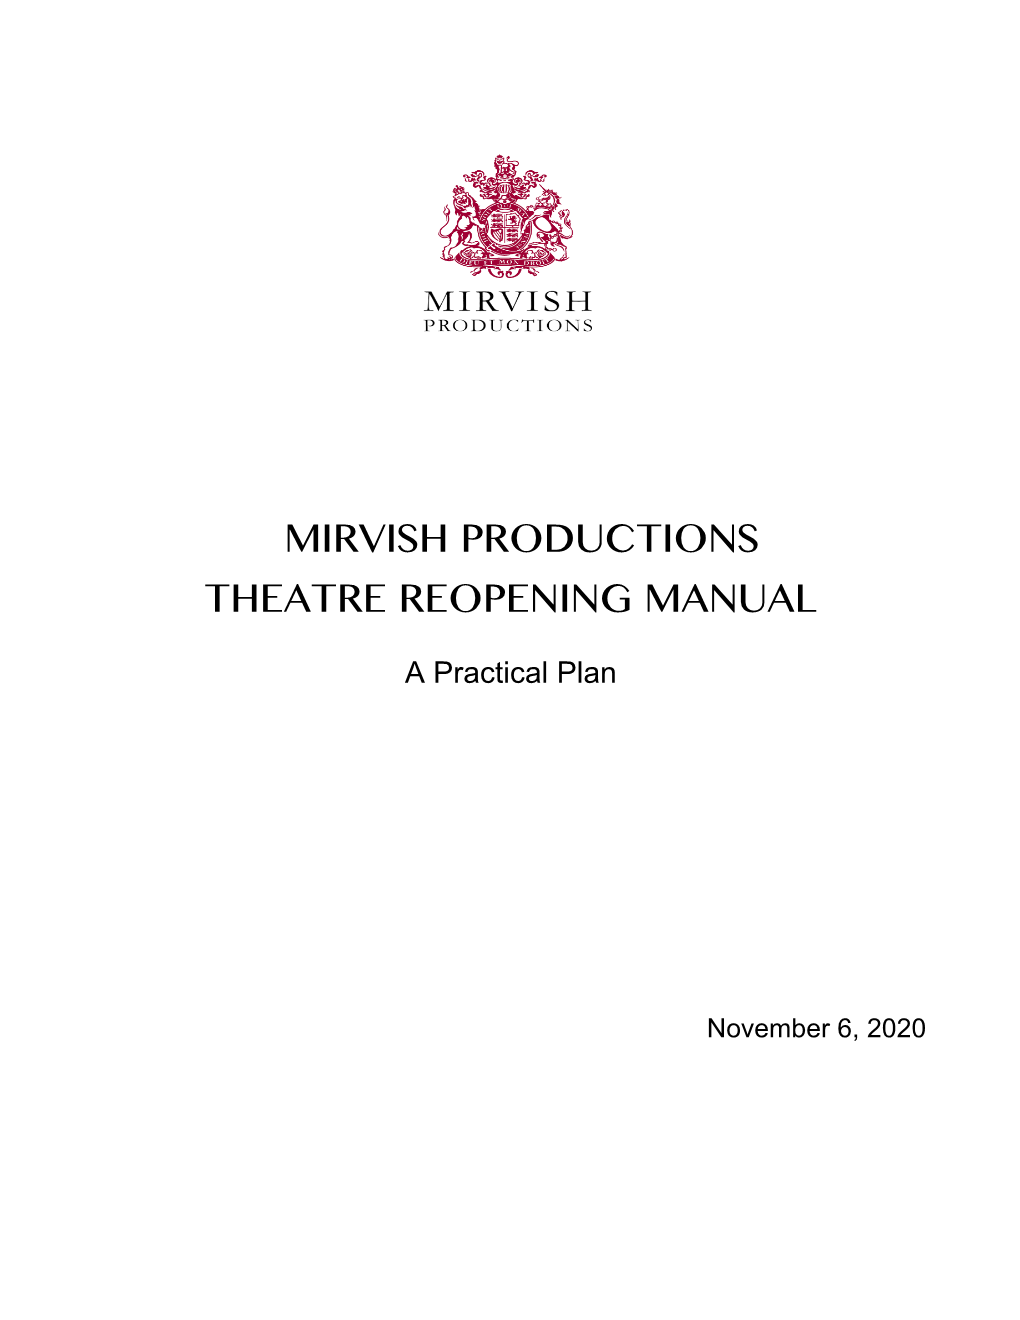 Mirvish Productions Theatre Reopening Manual